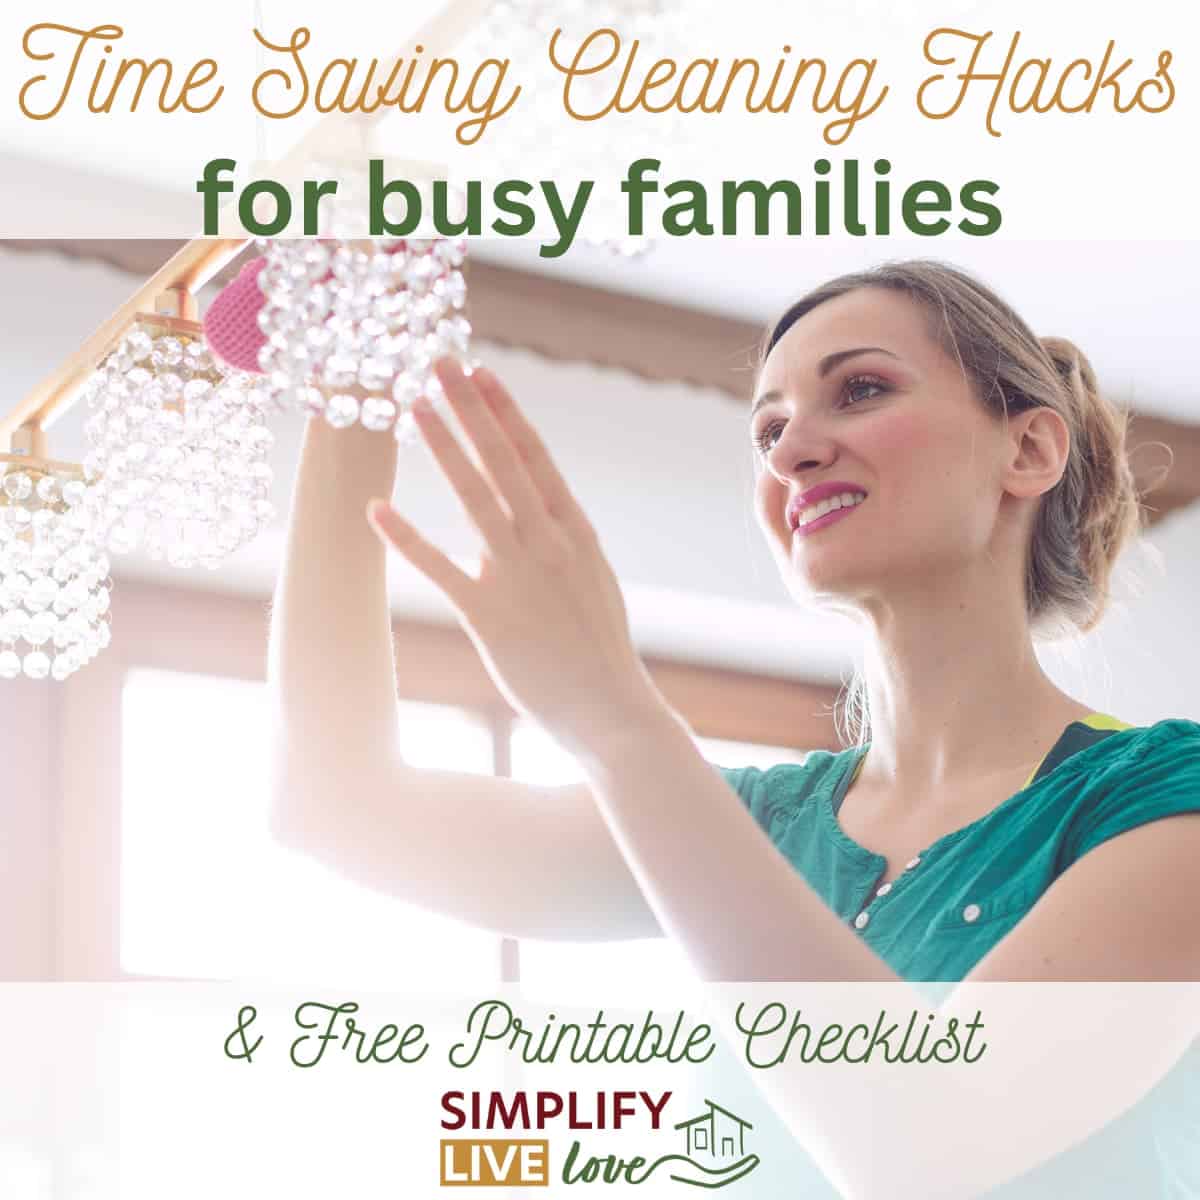 Easy Cleaning Hacks and Tips to Make Your Home Sparkle